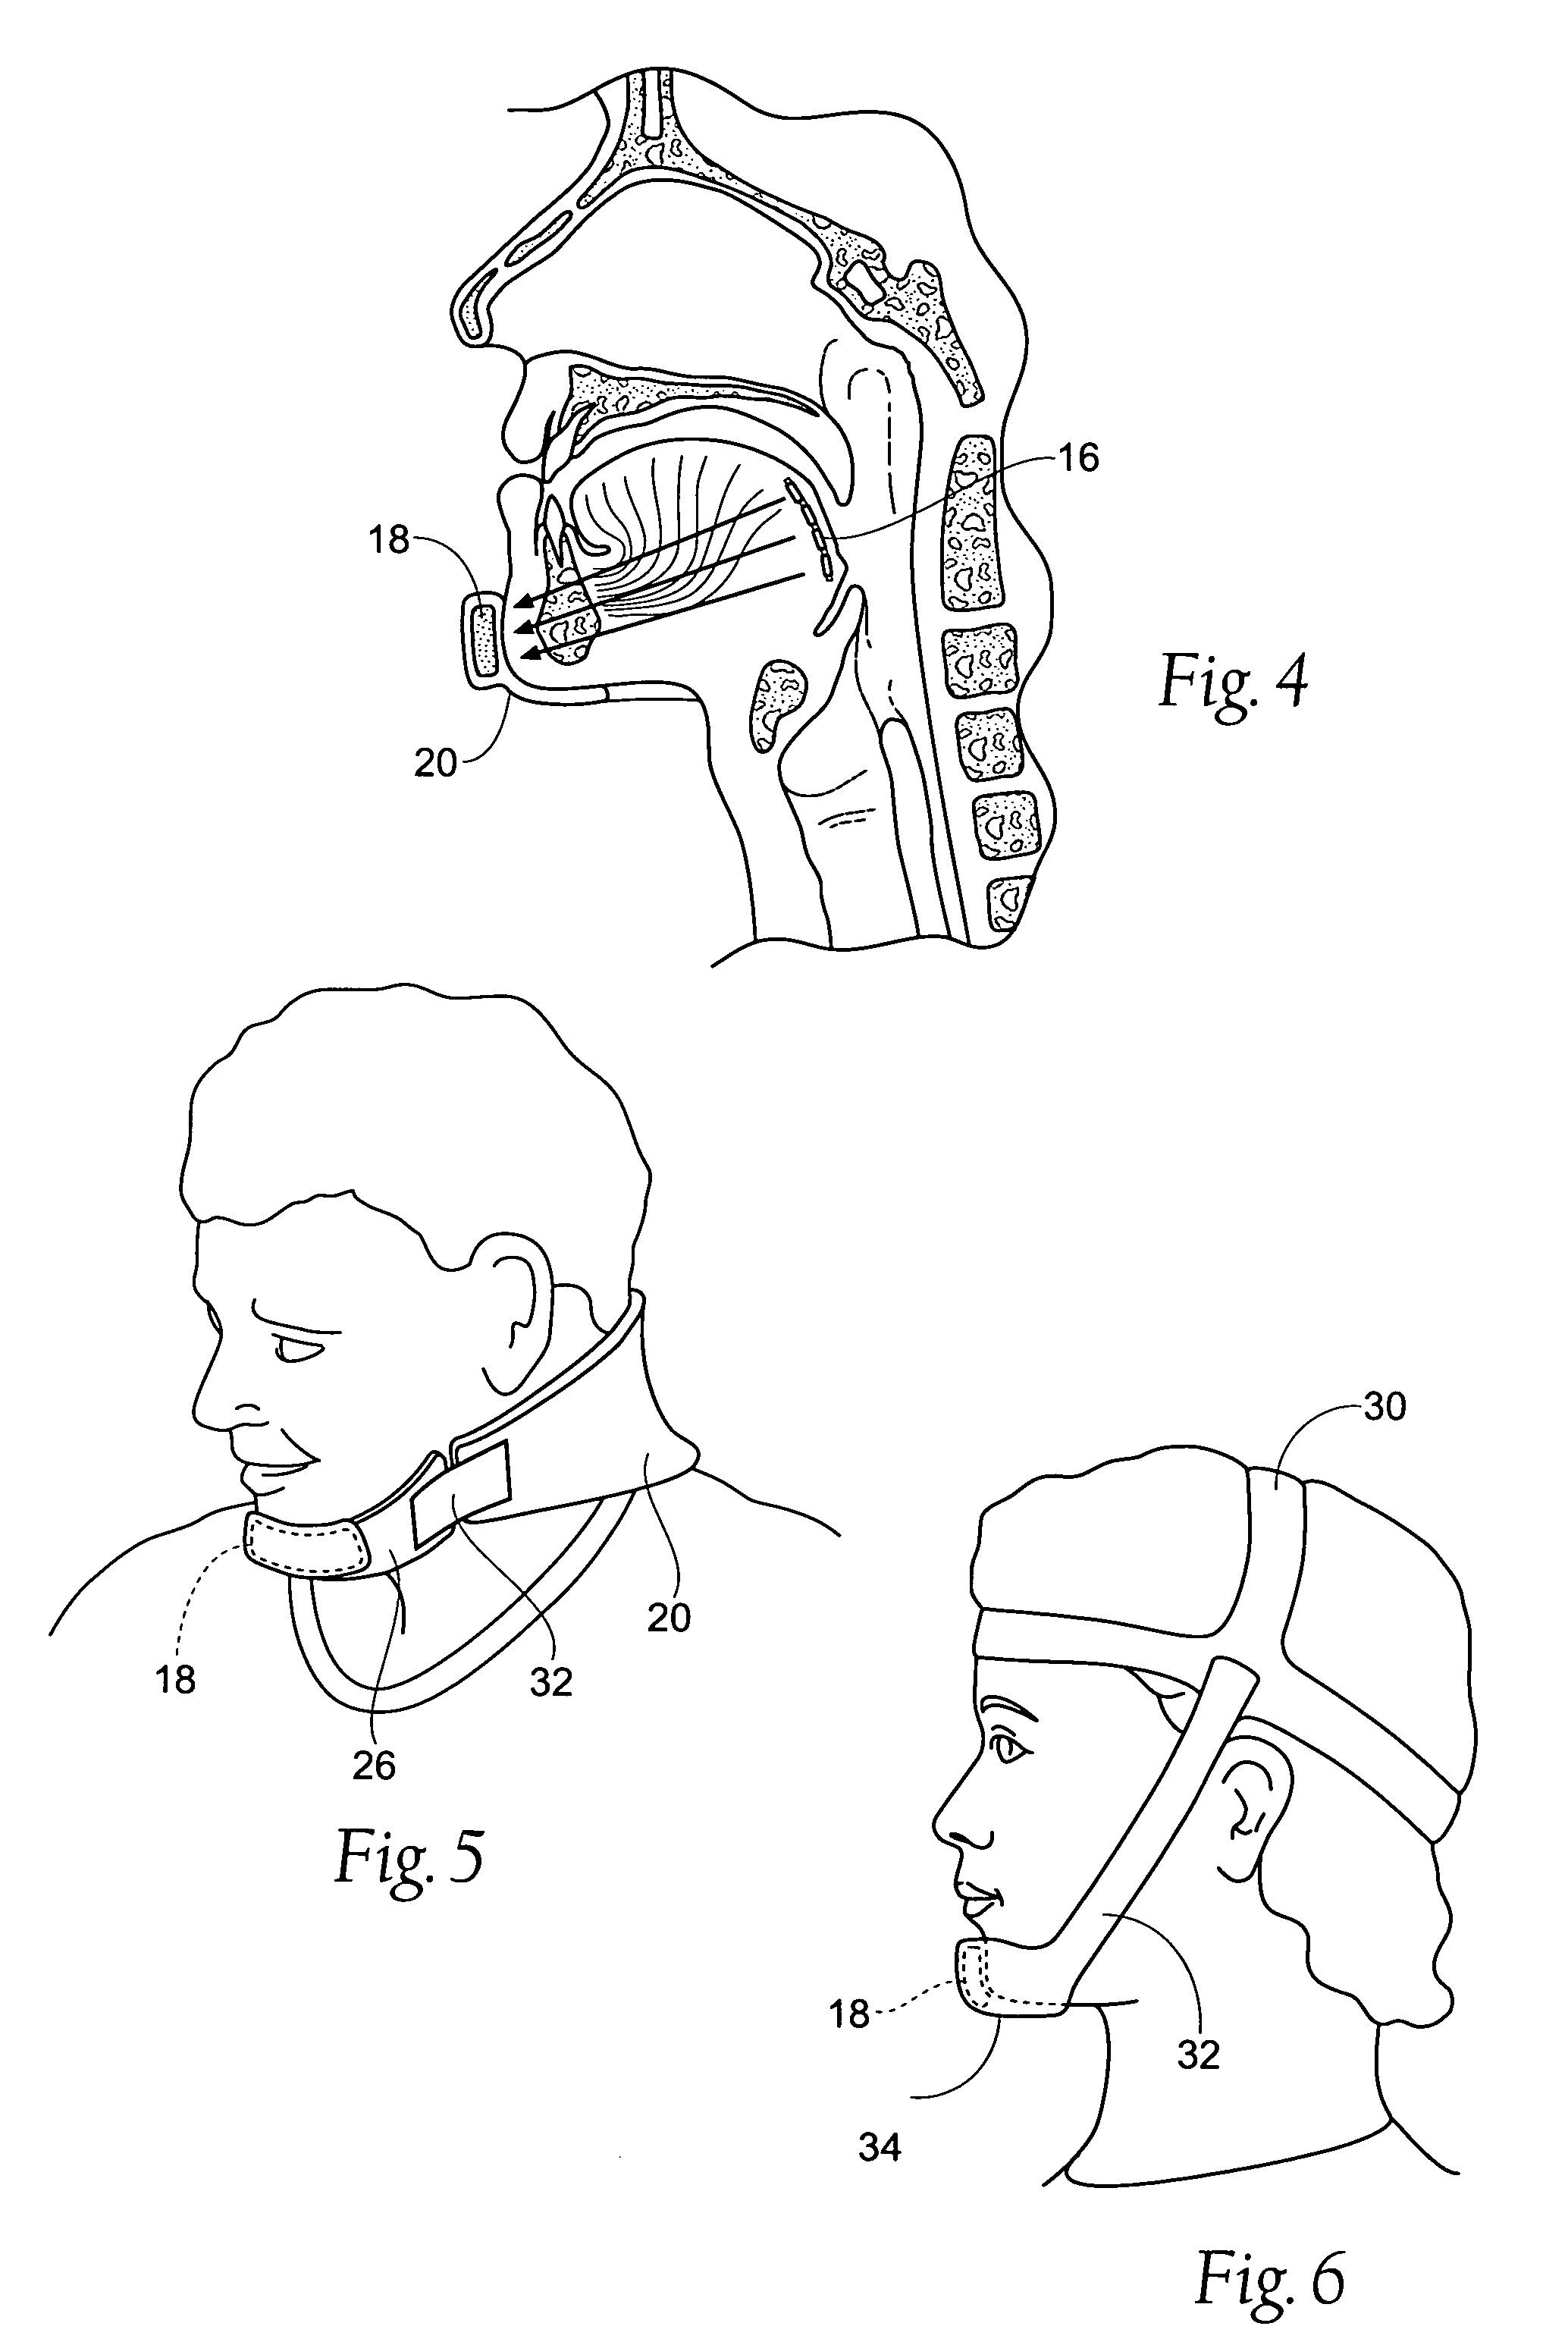 Devices, systems, and methods for stabilization or fixation of magnetic force devices used in or on a body